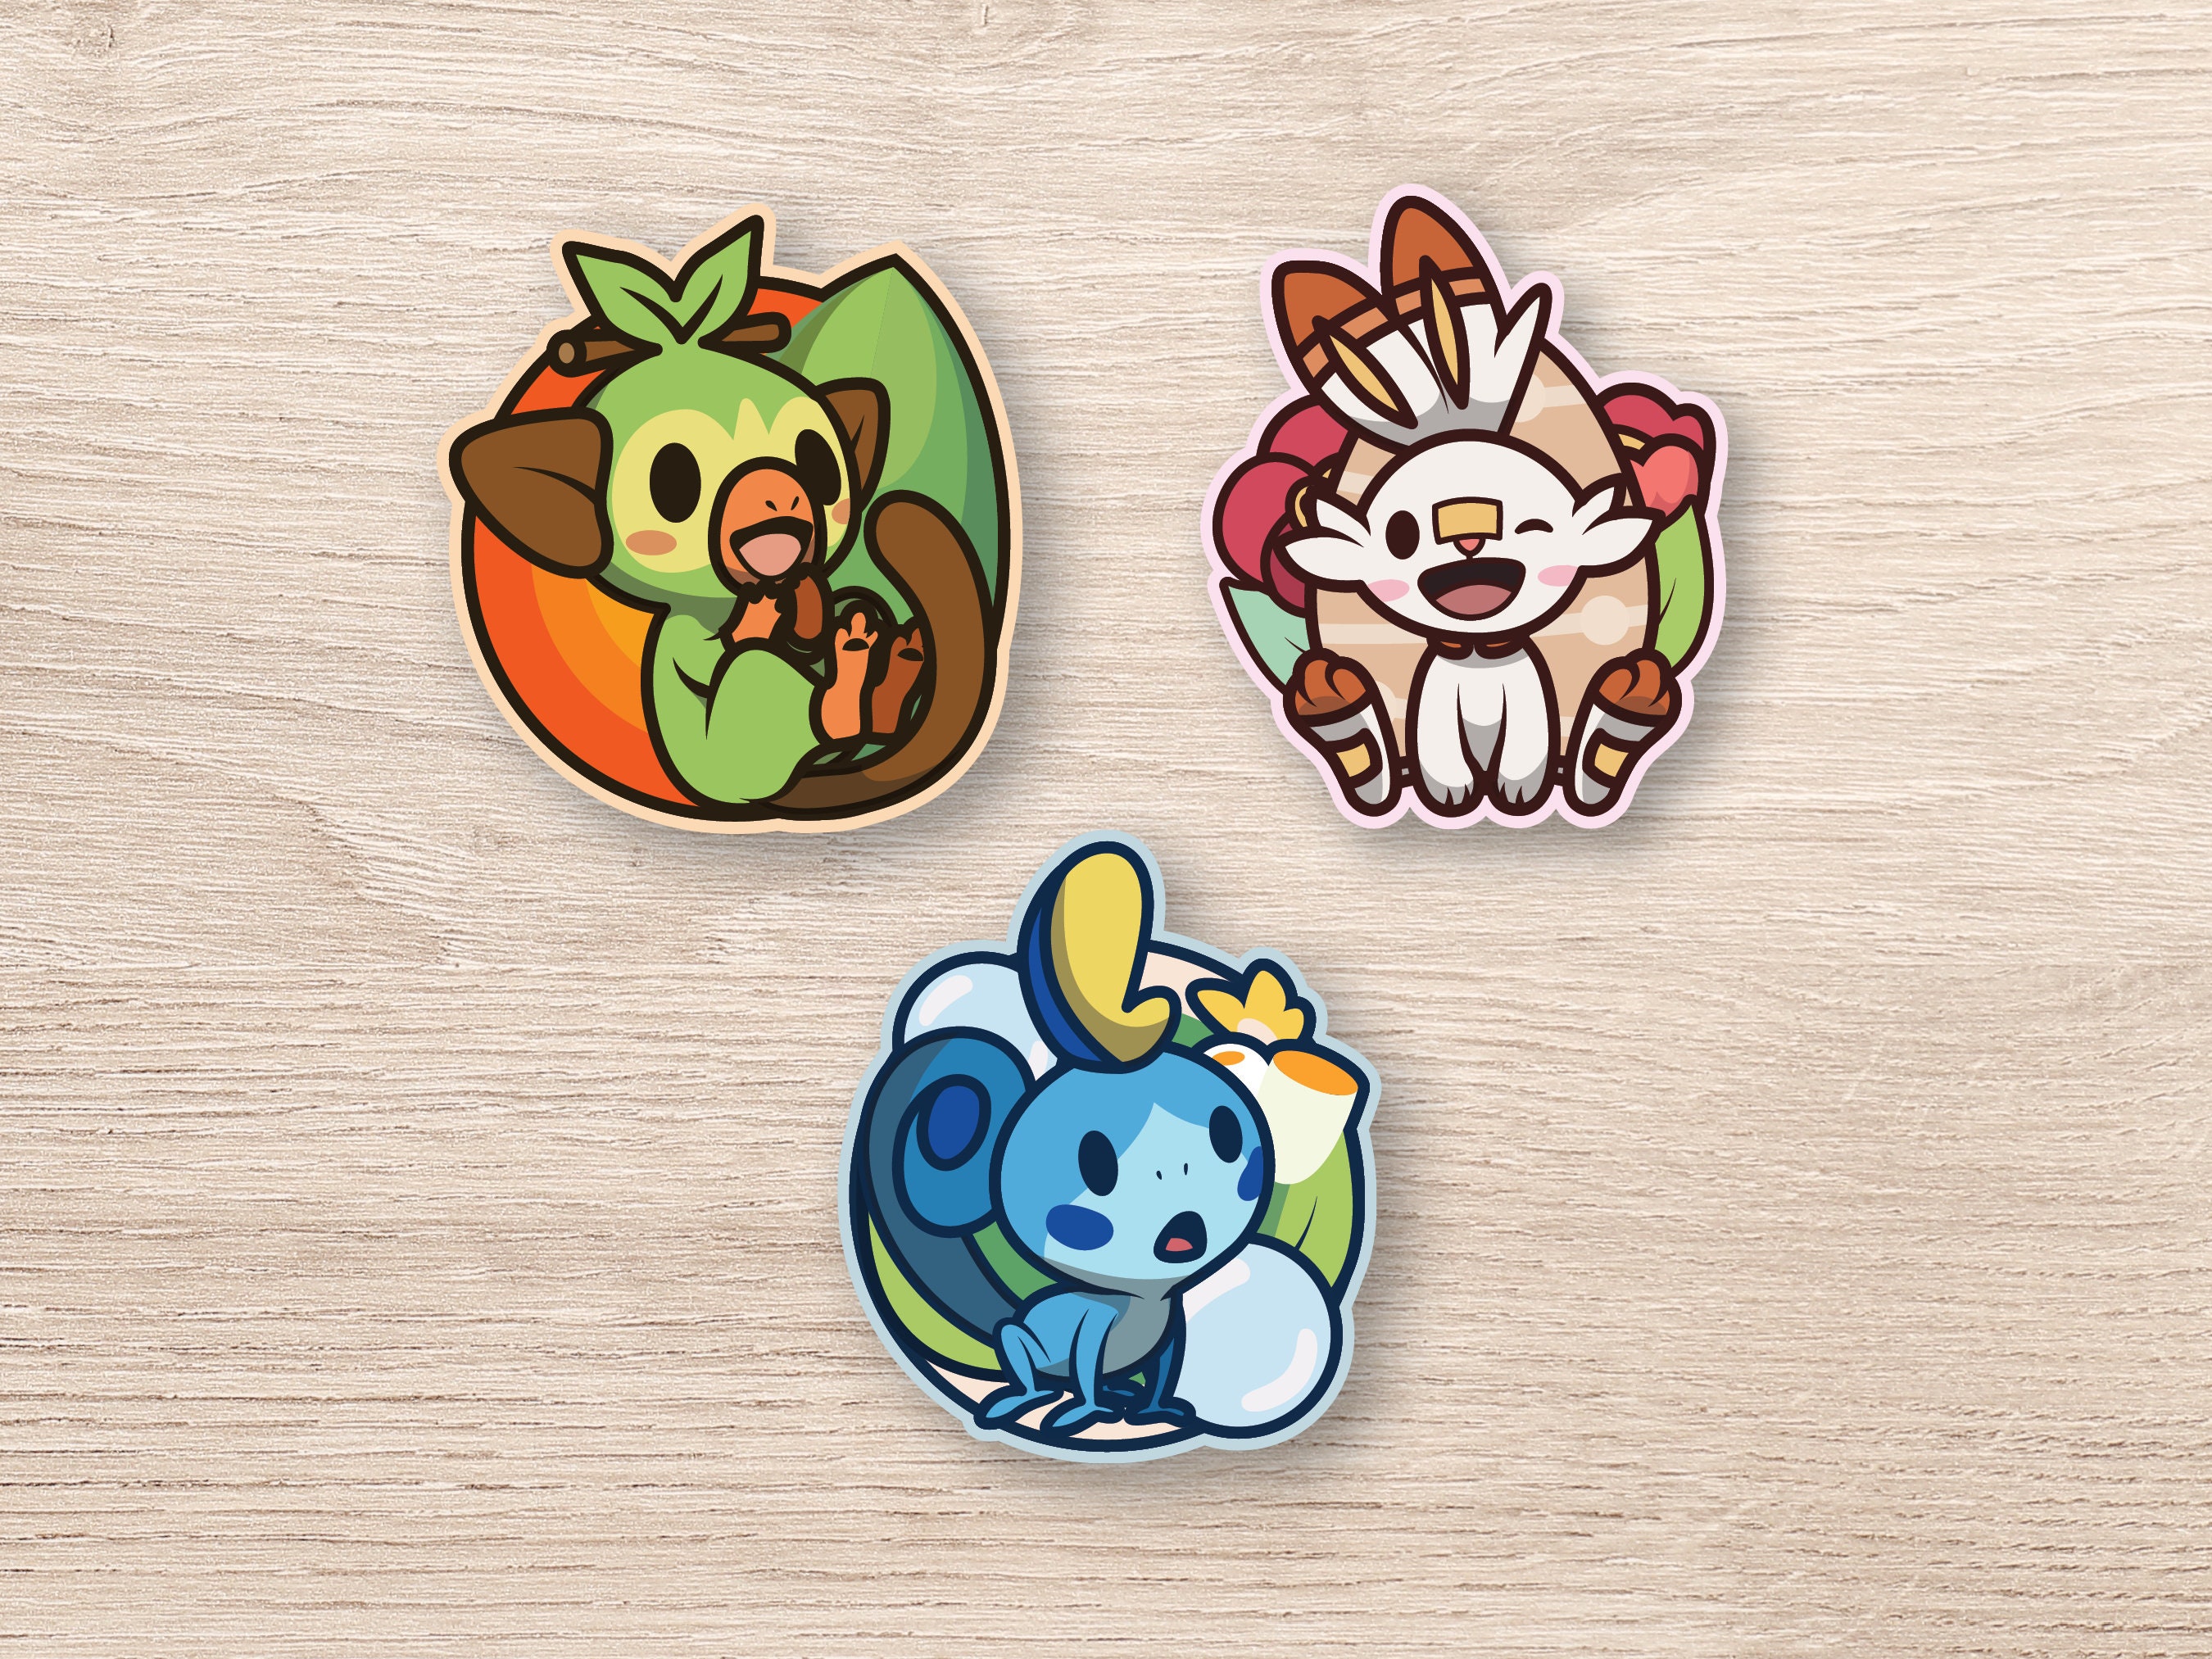 Sword and Shield Pokemon Patches!